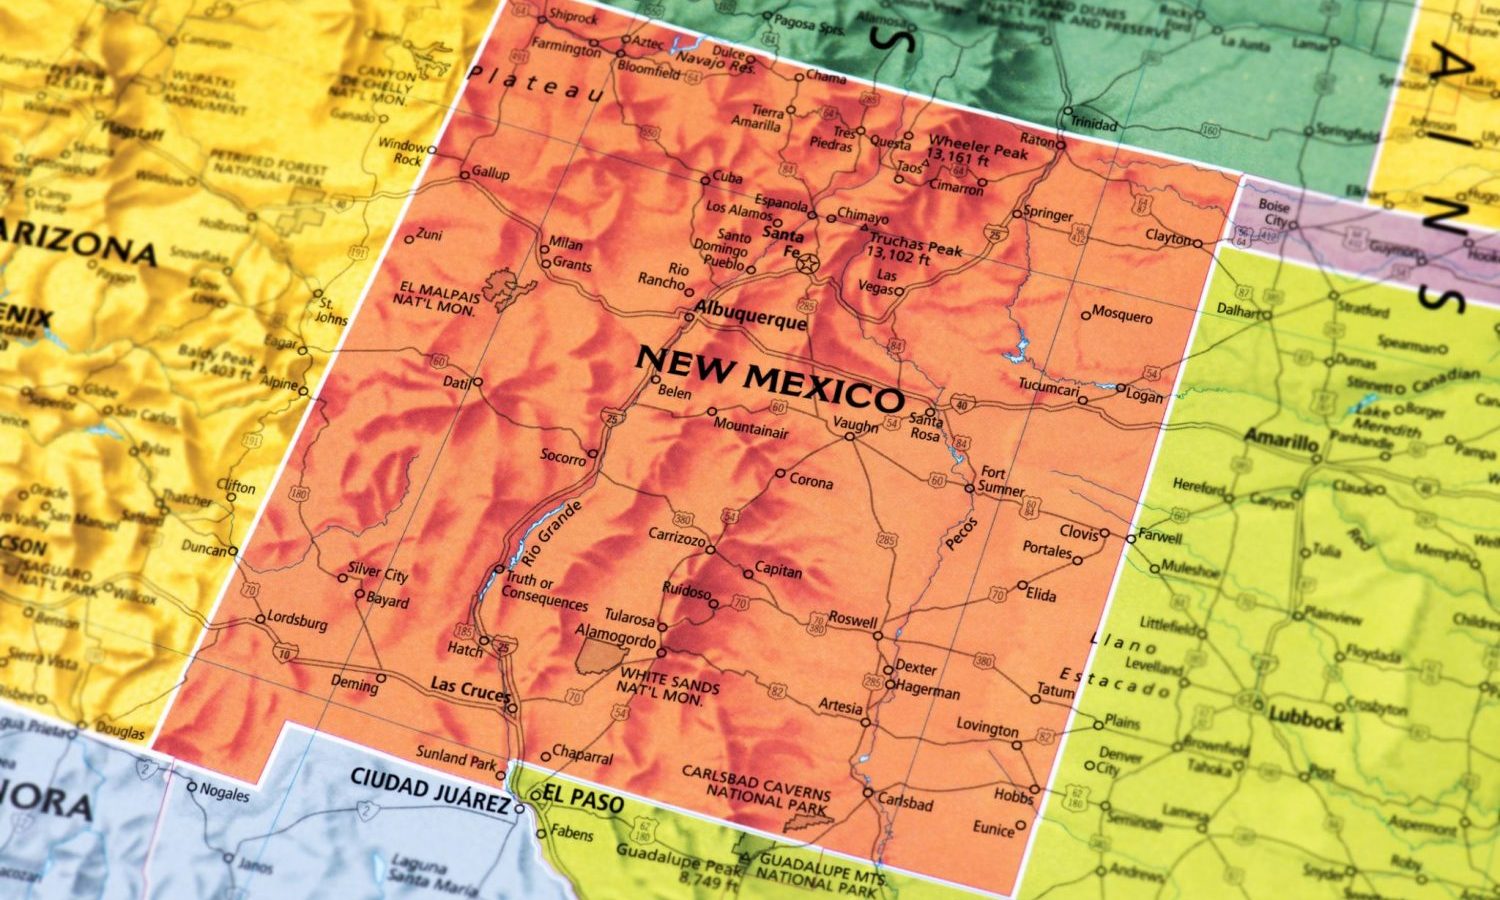 Adult-Use Cannabis Is Now Legal In New Mexico